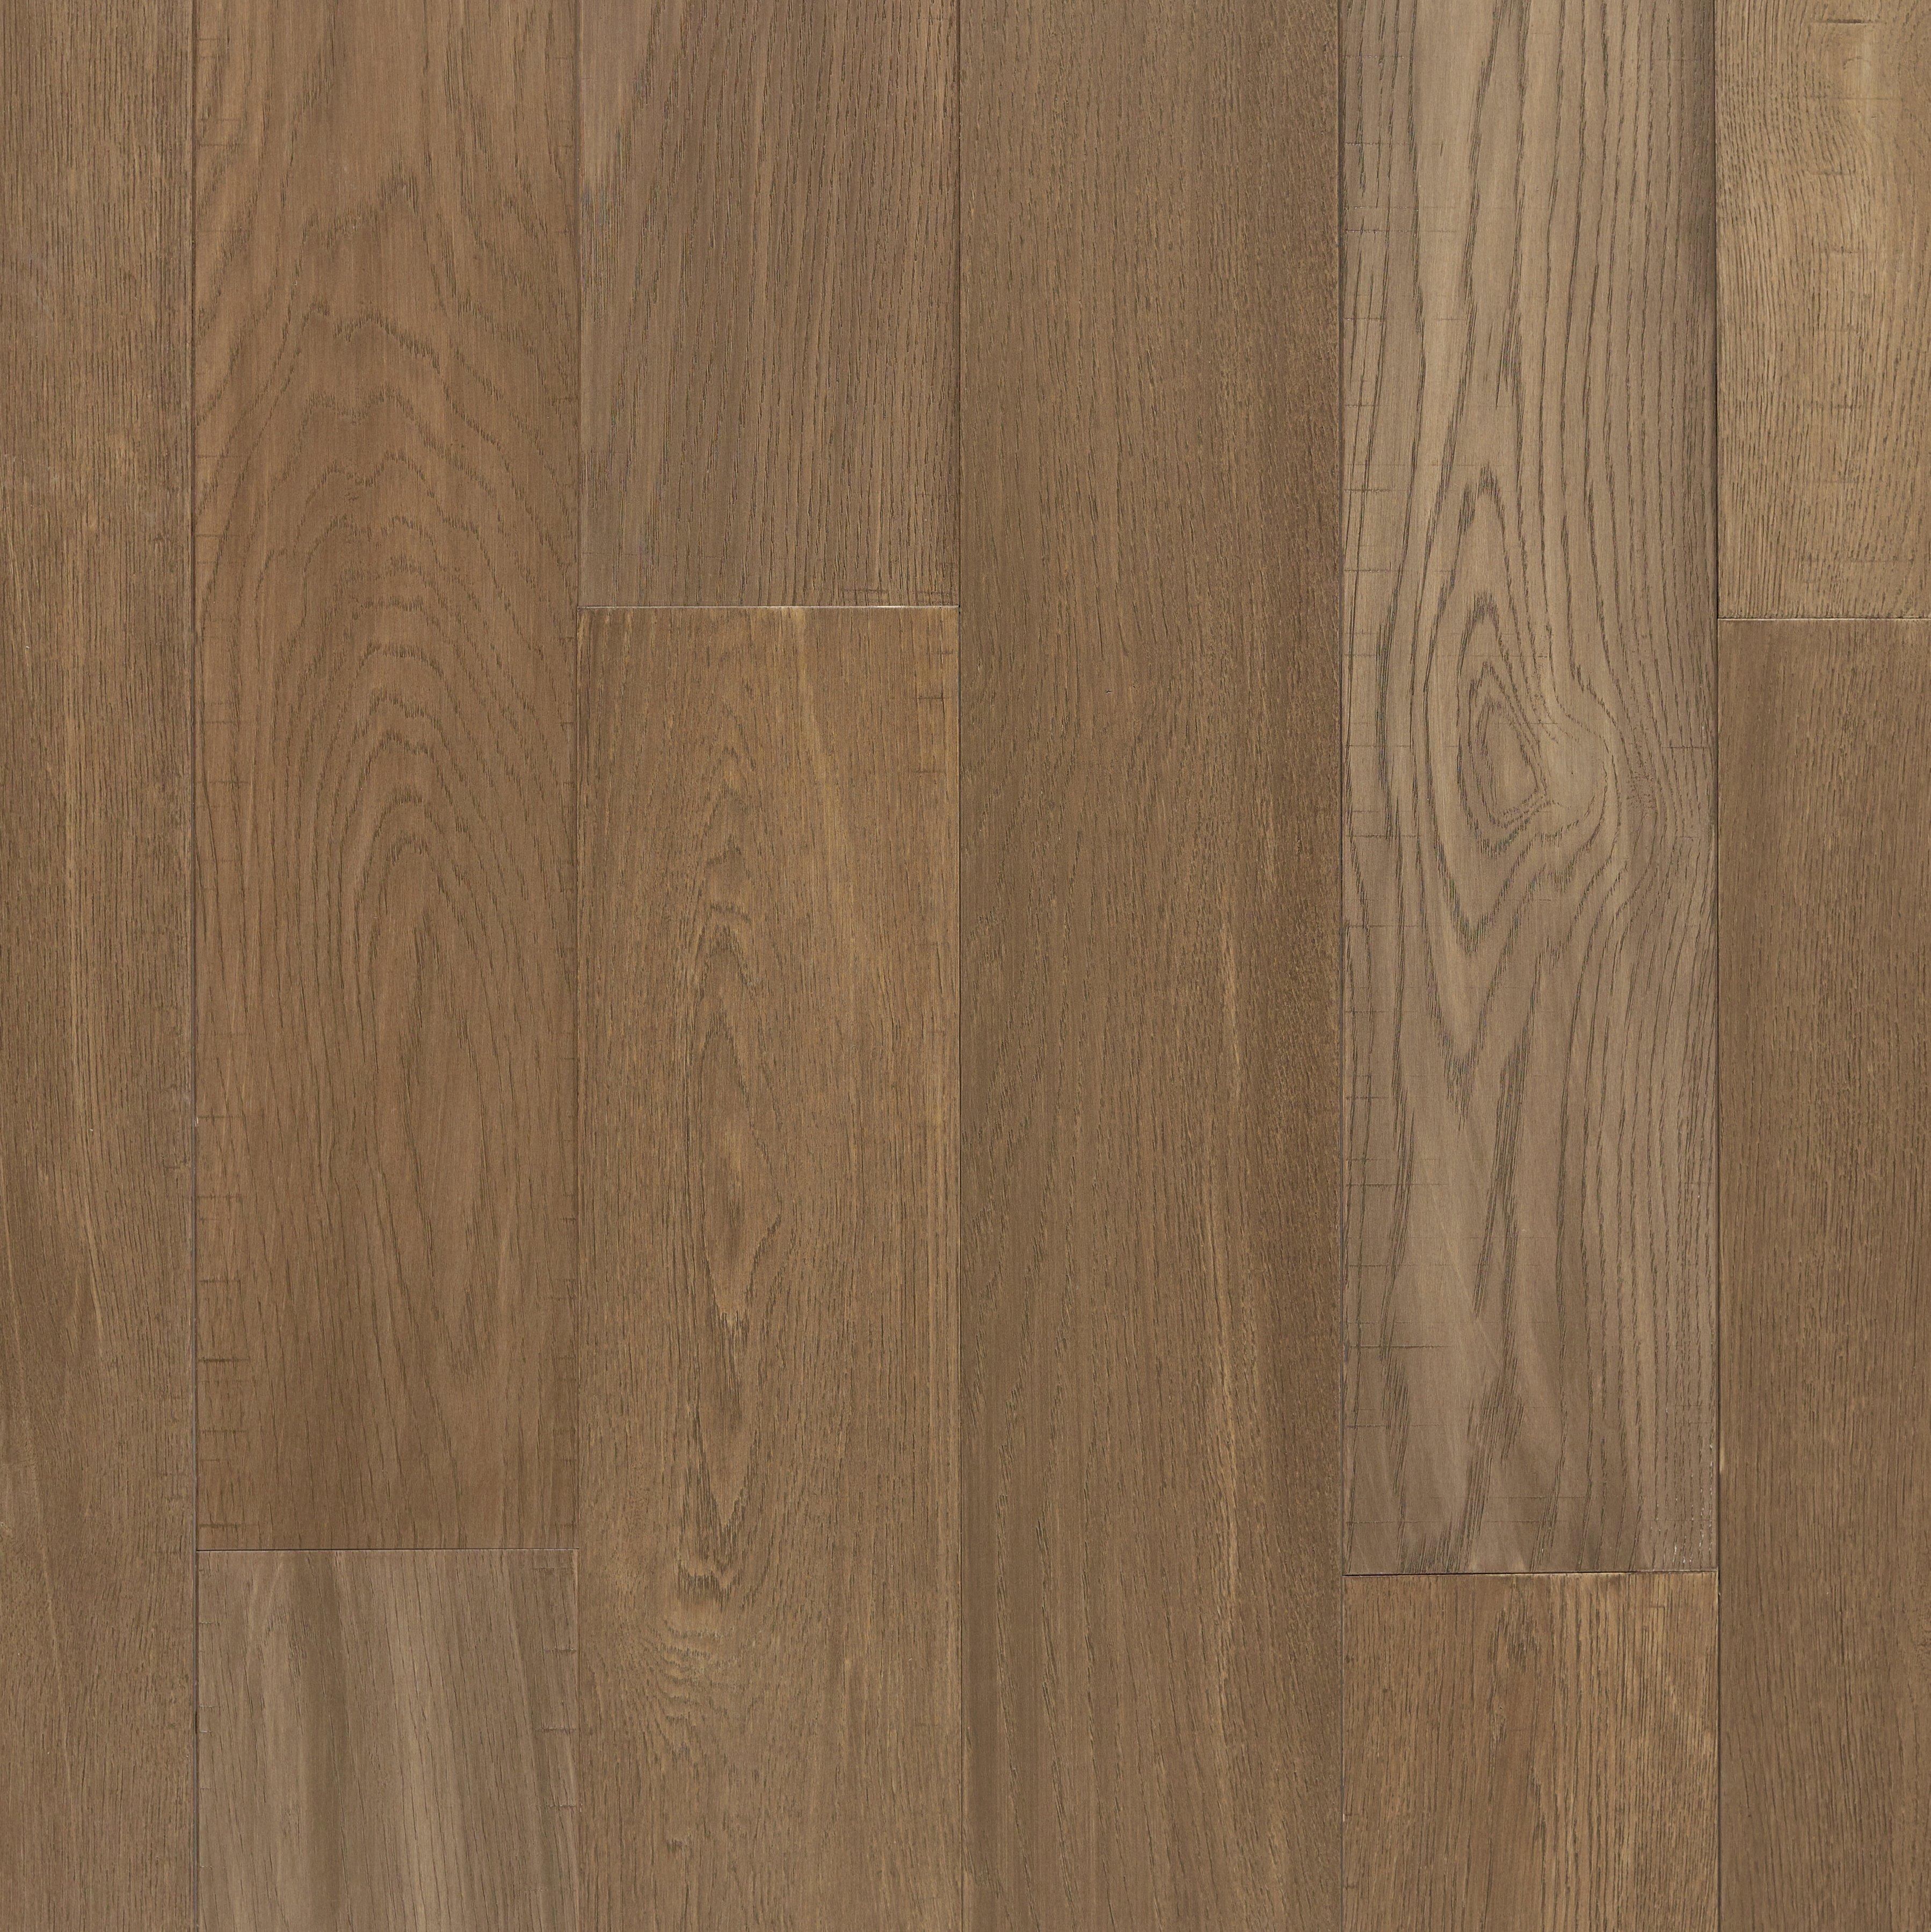 Laval White Oak Wire-Brushed Water-Resistant Engineered Hardwood